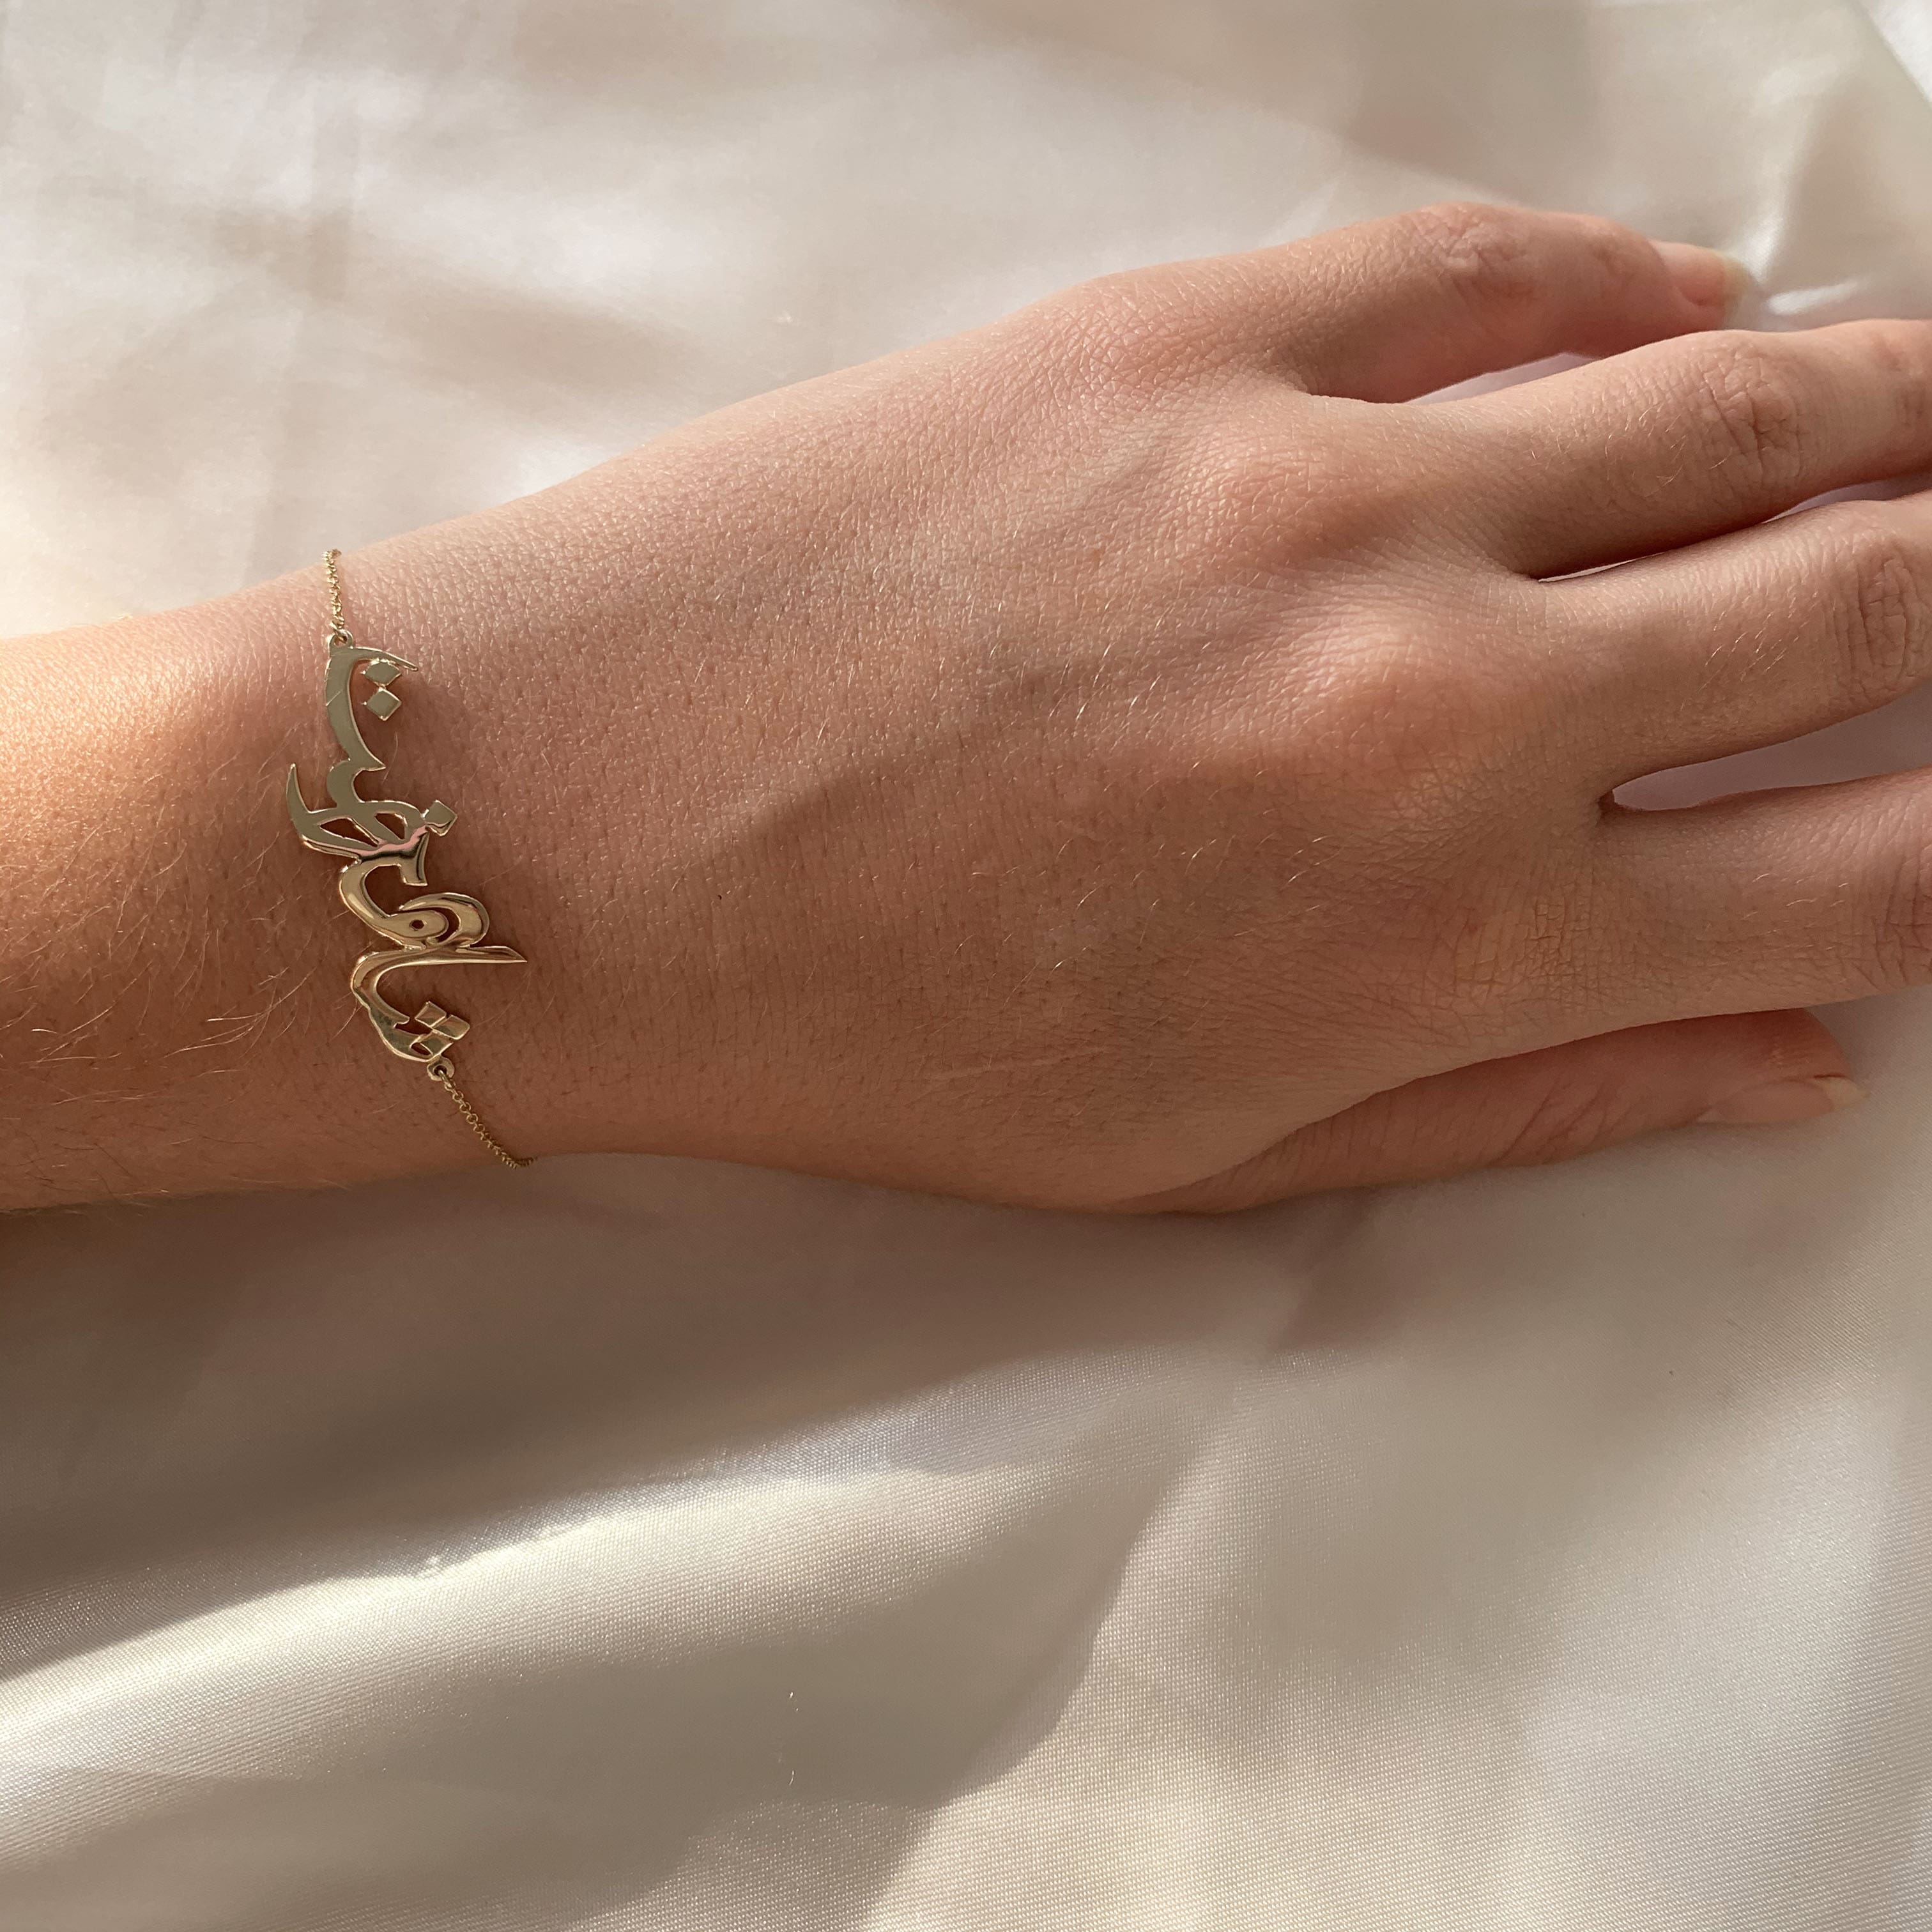 This bracelet engraved with the ayat al kursi verse is your daily remi... |  TikTok